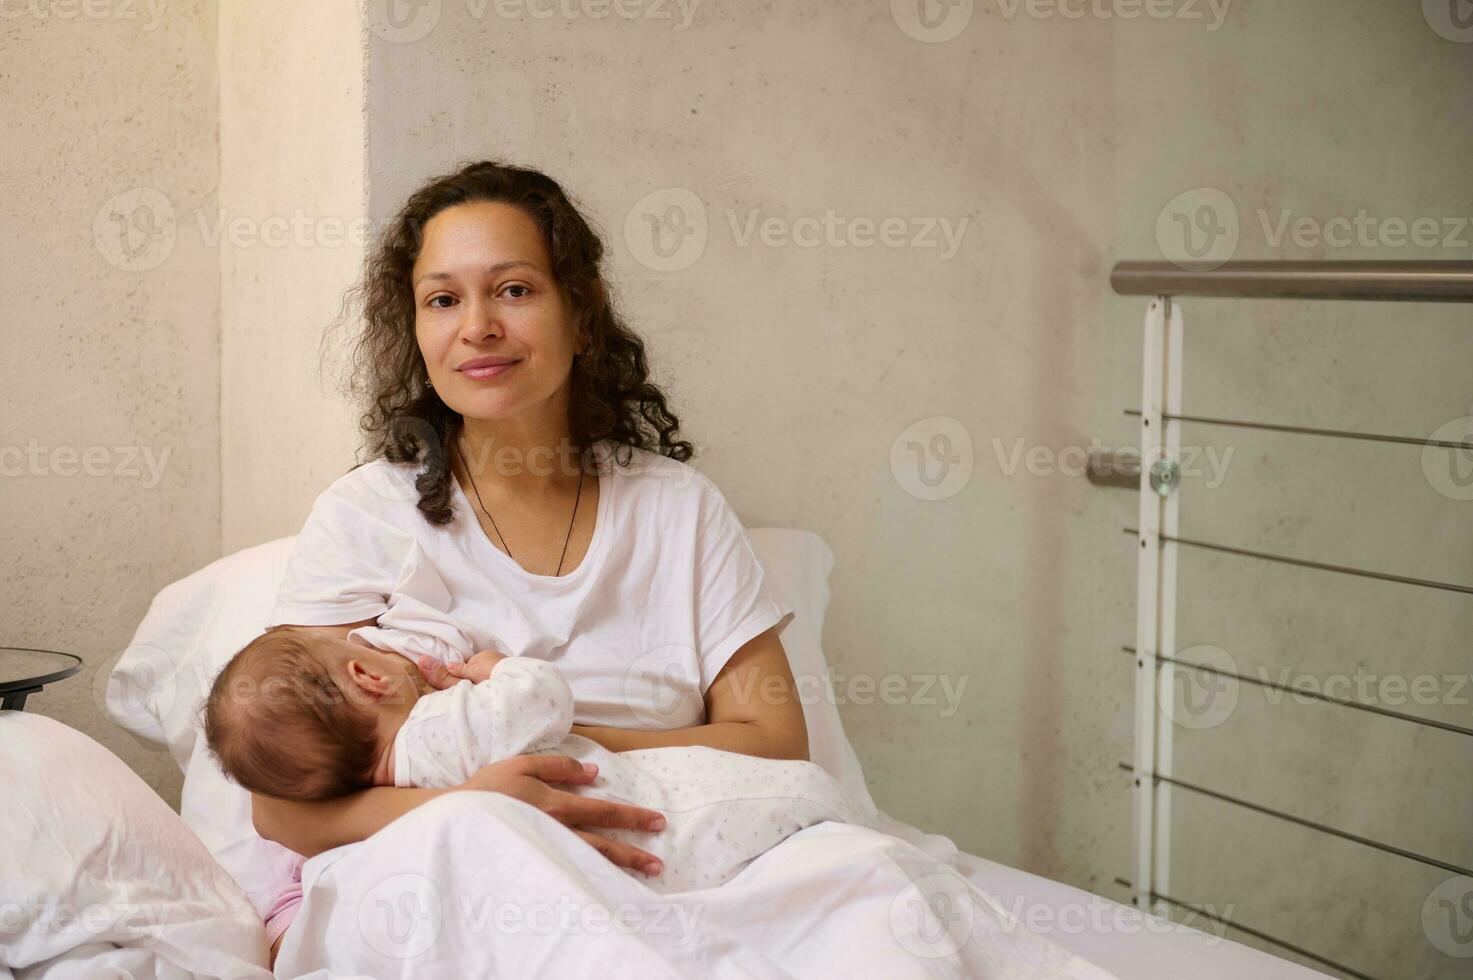 Beautiful Latin American woman, young loving caring mother in white pajamas, breastfeeding her baby in cozy home bedchamber, smiling and confidently looking at the camera. Maternity leave lifestyle photo